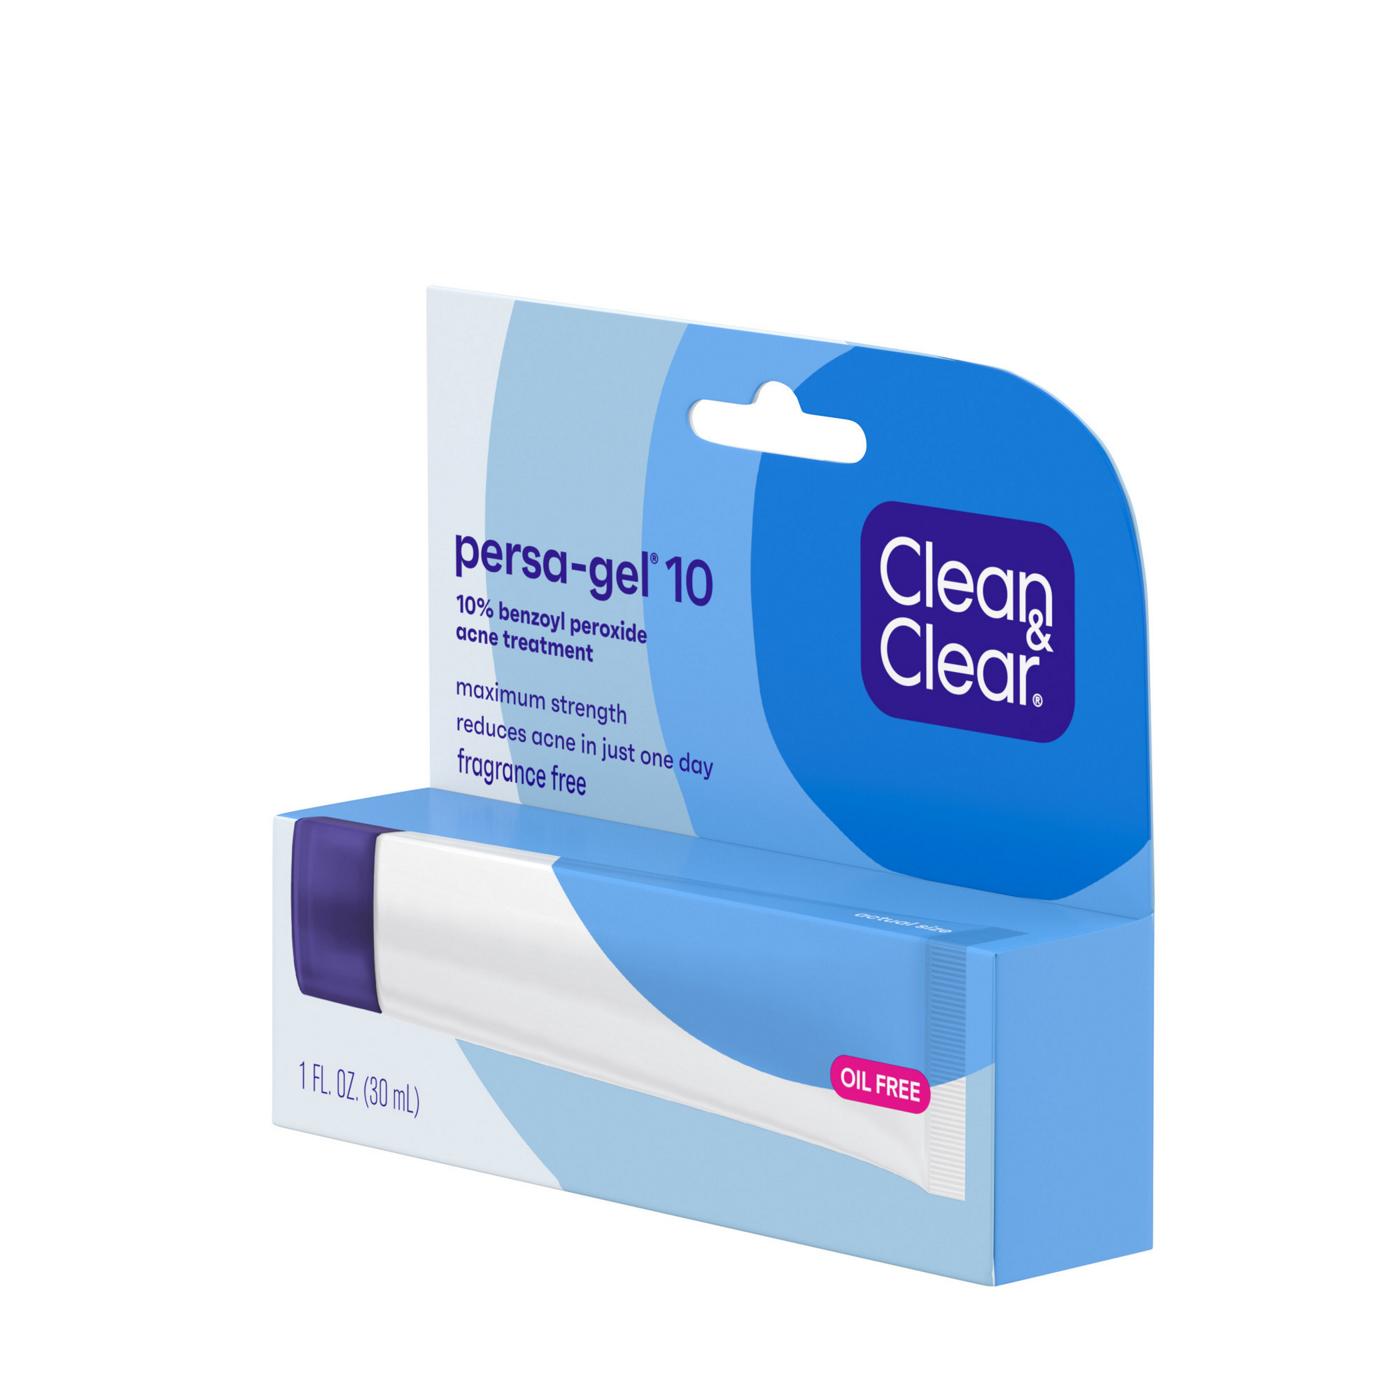 Clean & Clear Persa-Gel 10 Maximum Strength Acne Medication; image 3 of 8